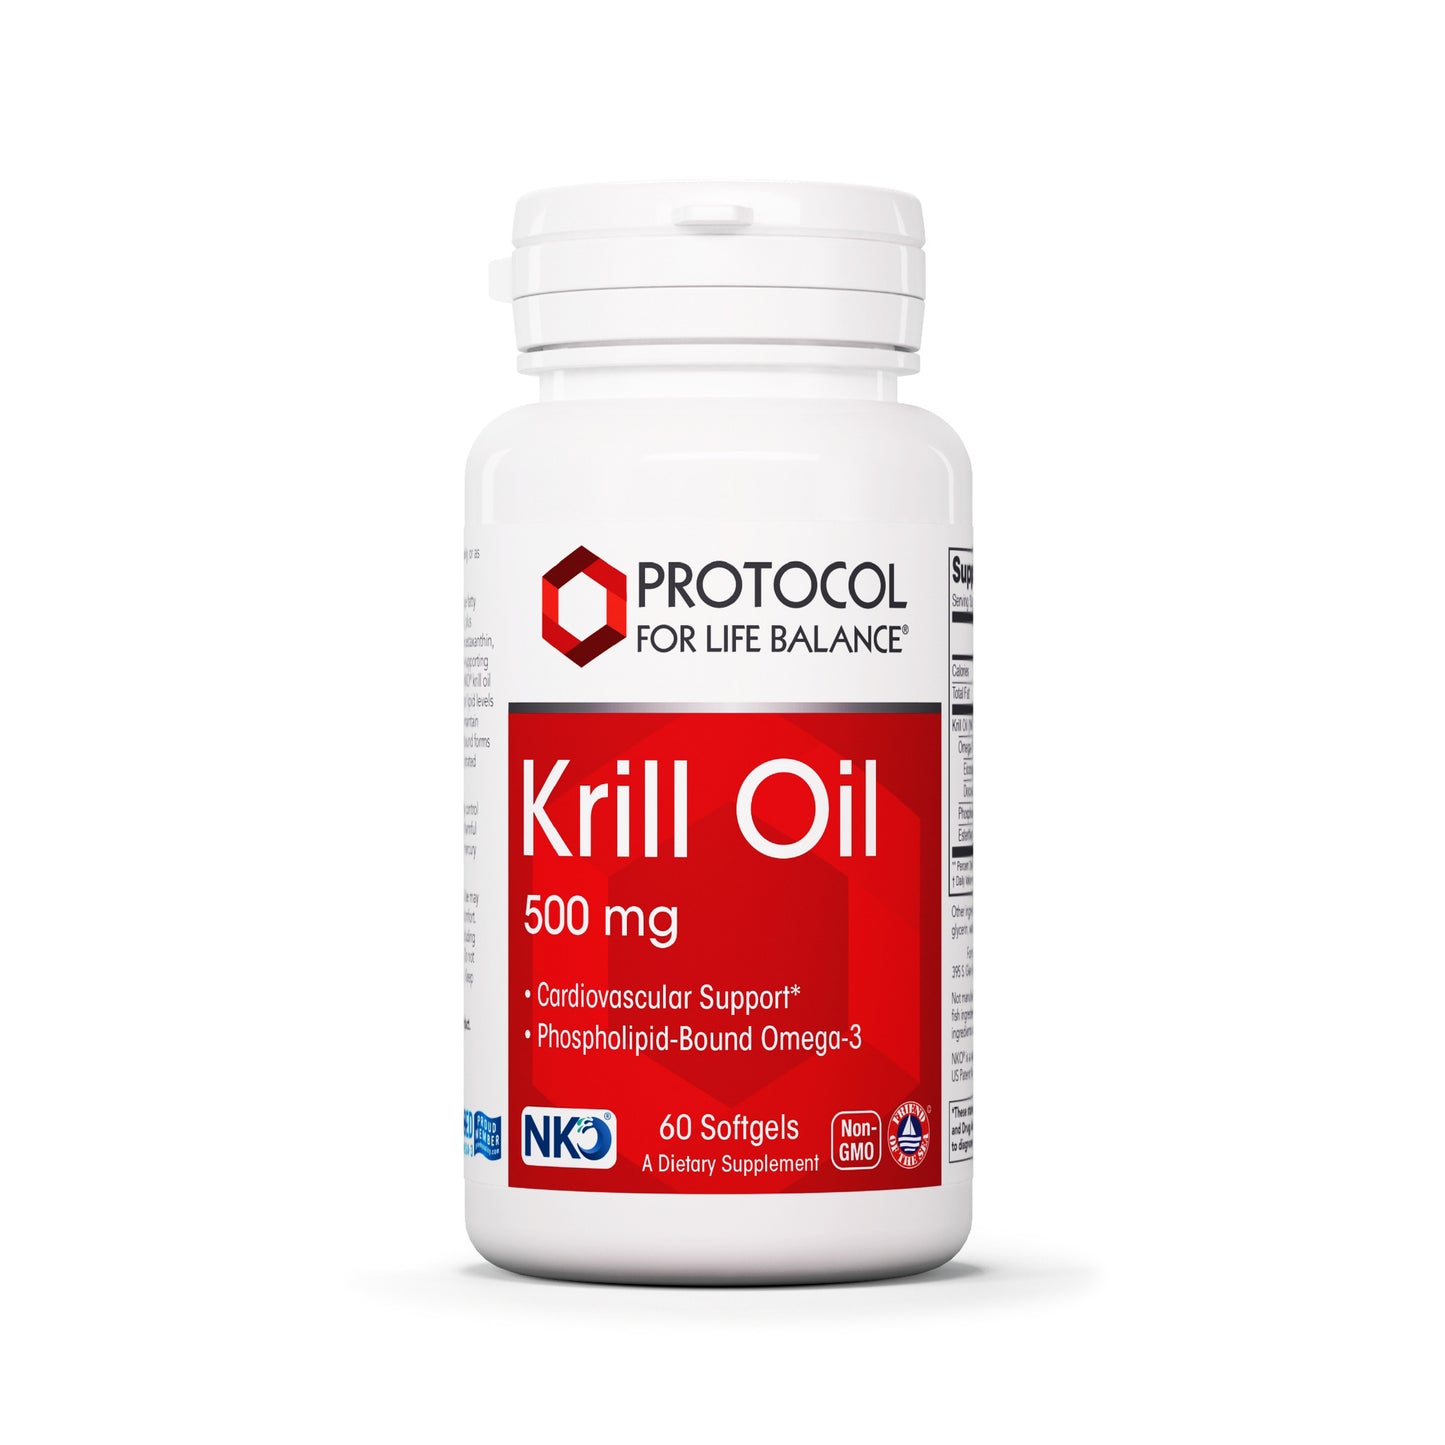 Protocol for Life Balance, Neptune Krill Oil, 250 mg, 60 Softgels